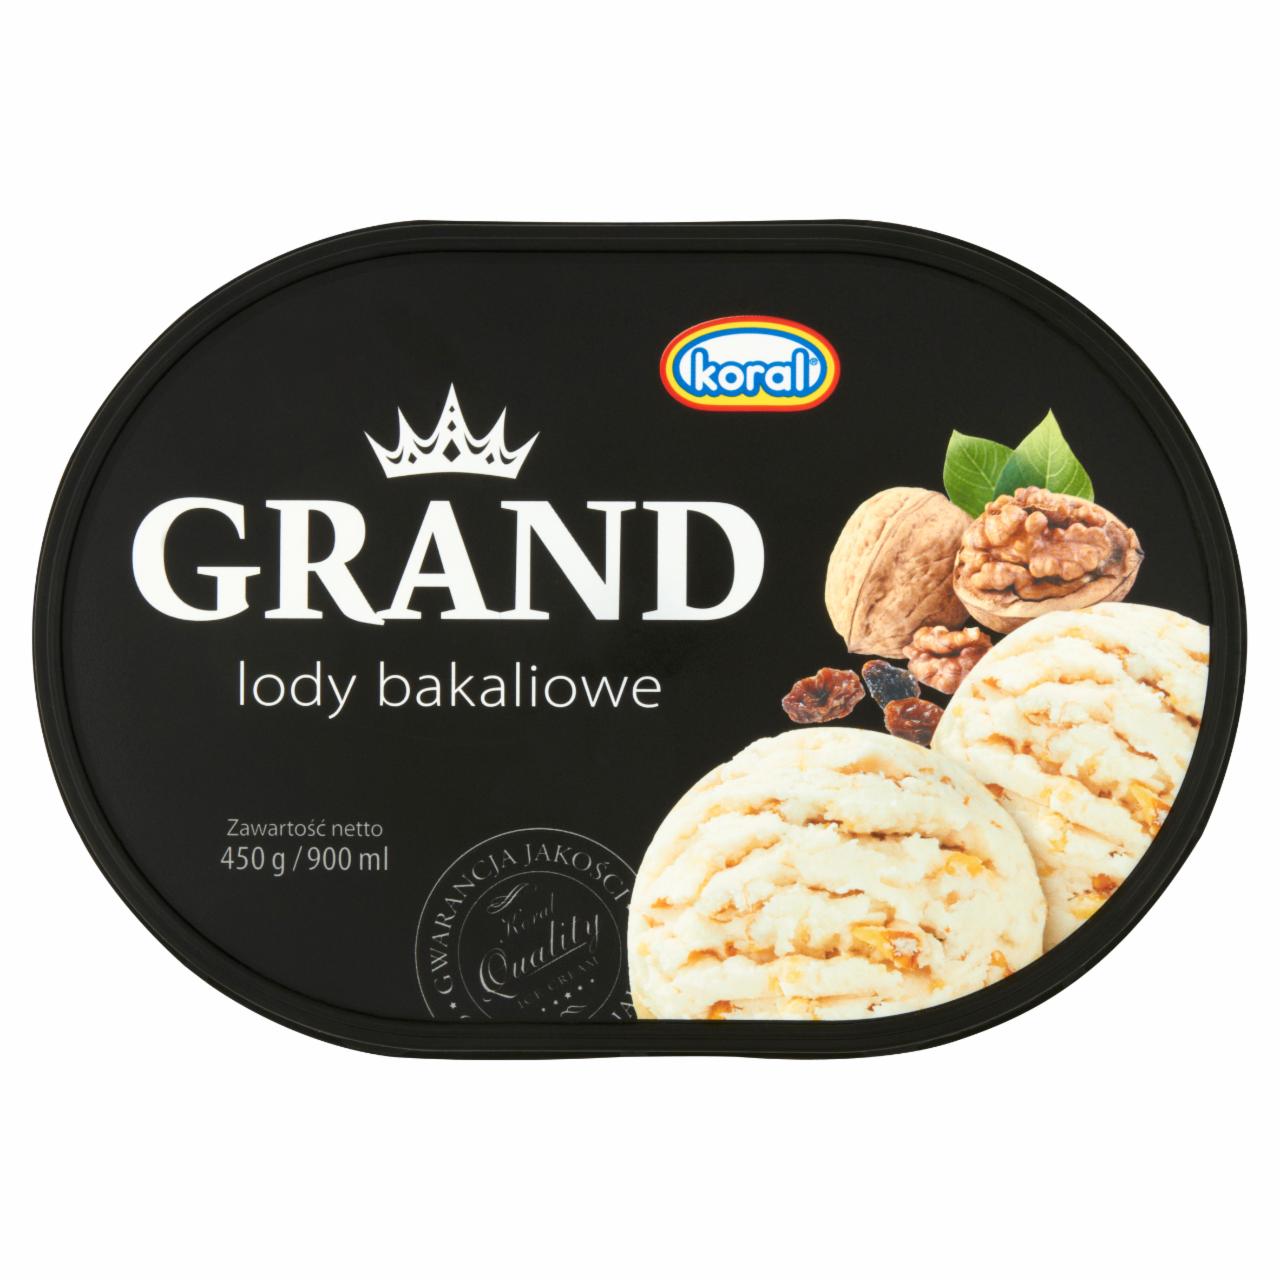 Photo - Koral Grand Dried Fruit and Nuts Ice Cream 900 ml